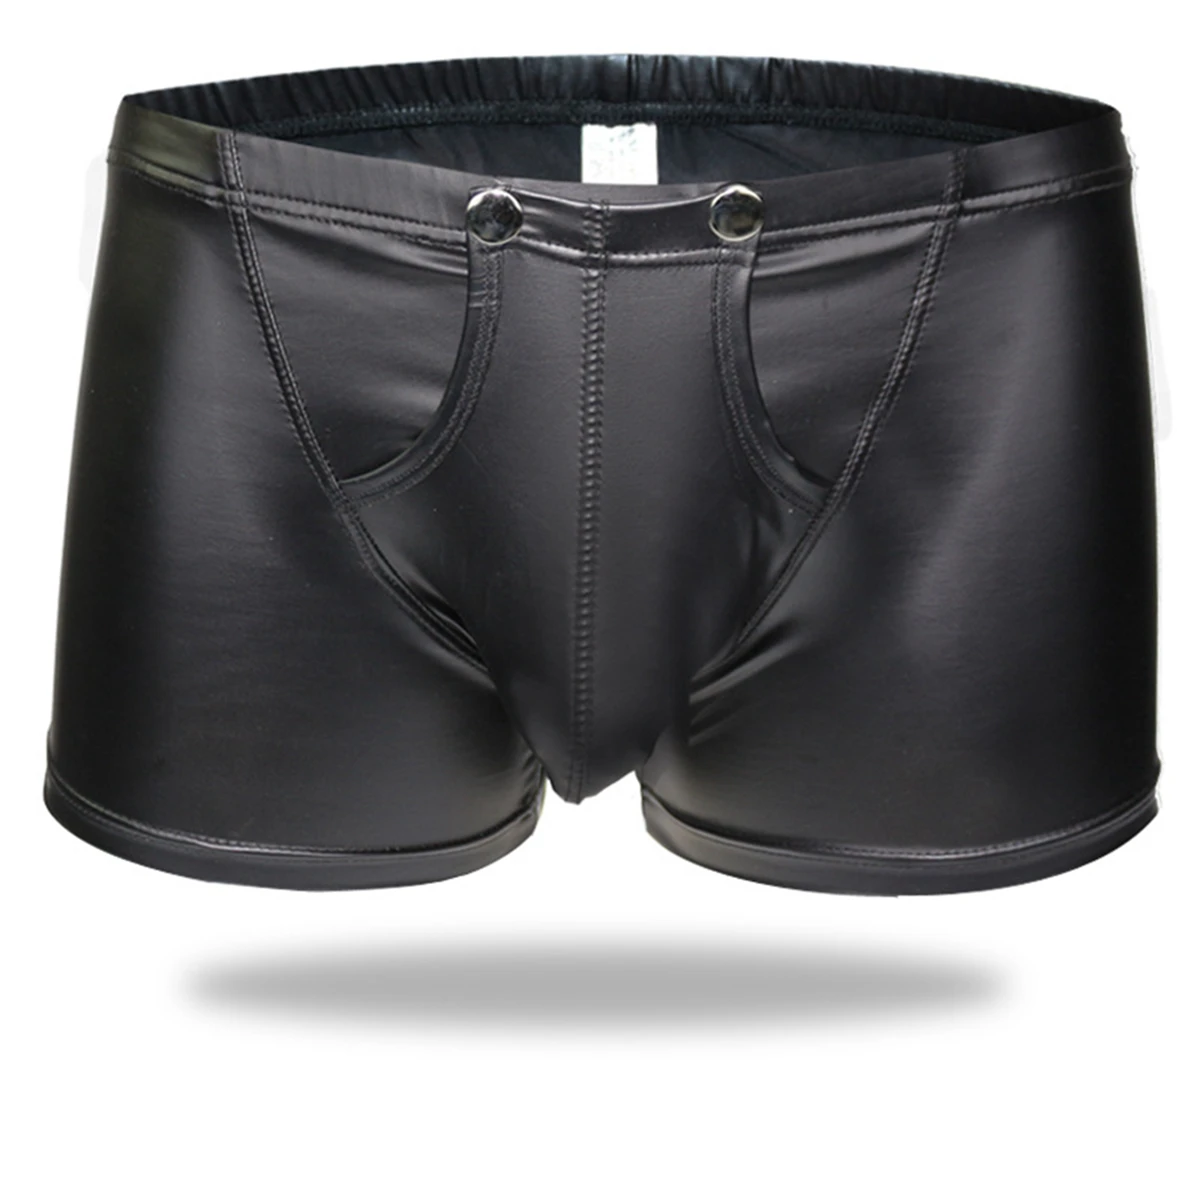 

Plus Size Sexy Mannen Boxers Open Kruis Faux Leather Lingerie Stage U Bolle Pouch Zwart Lakleer Boxers Shorts Ondergoed